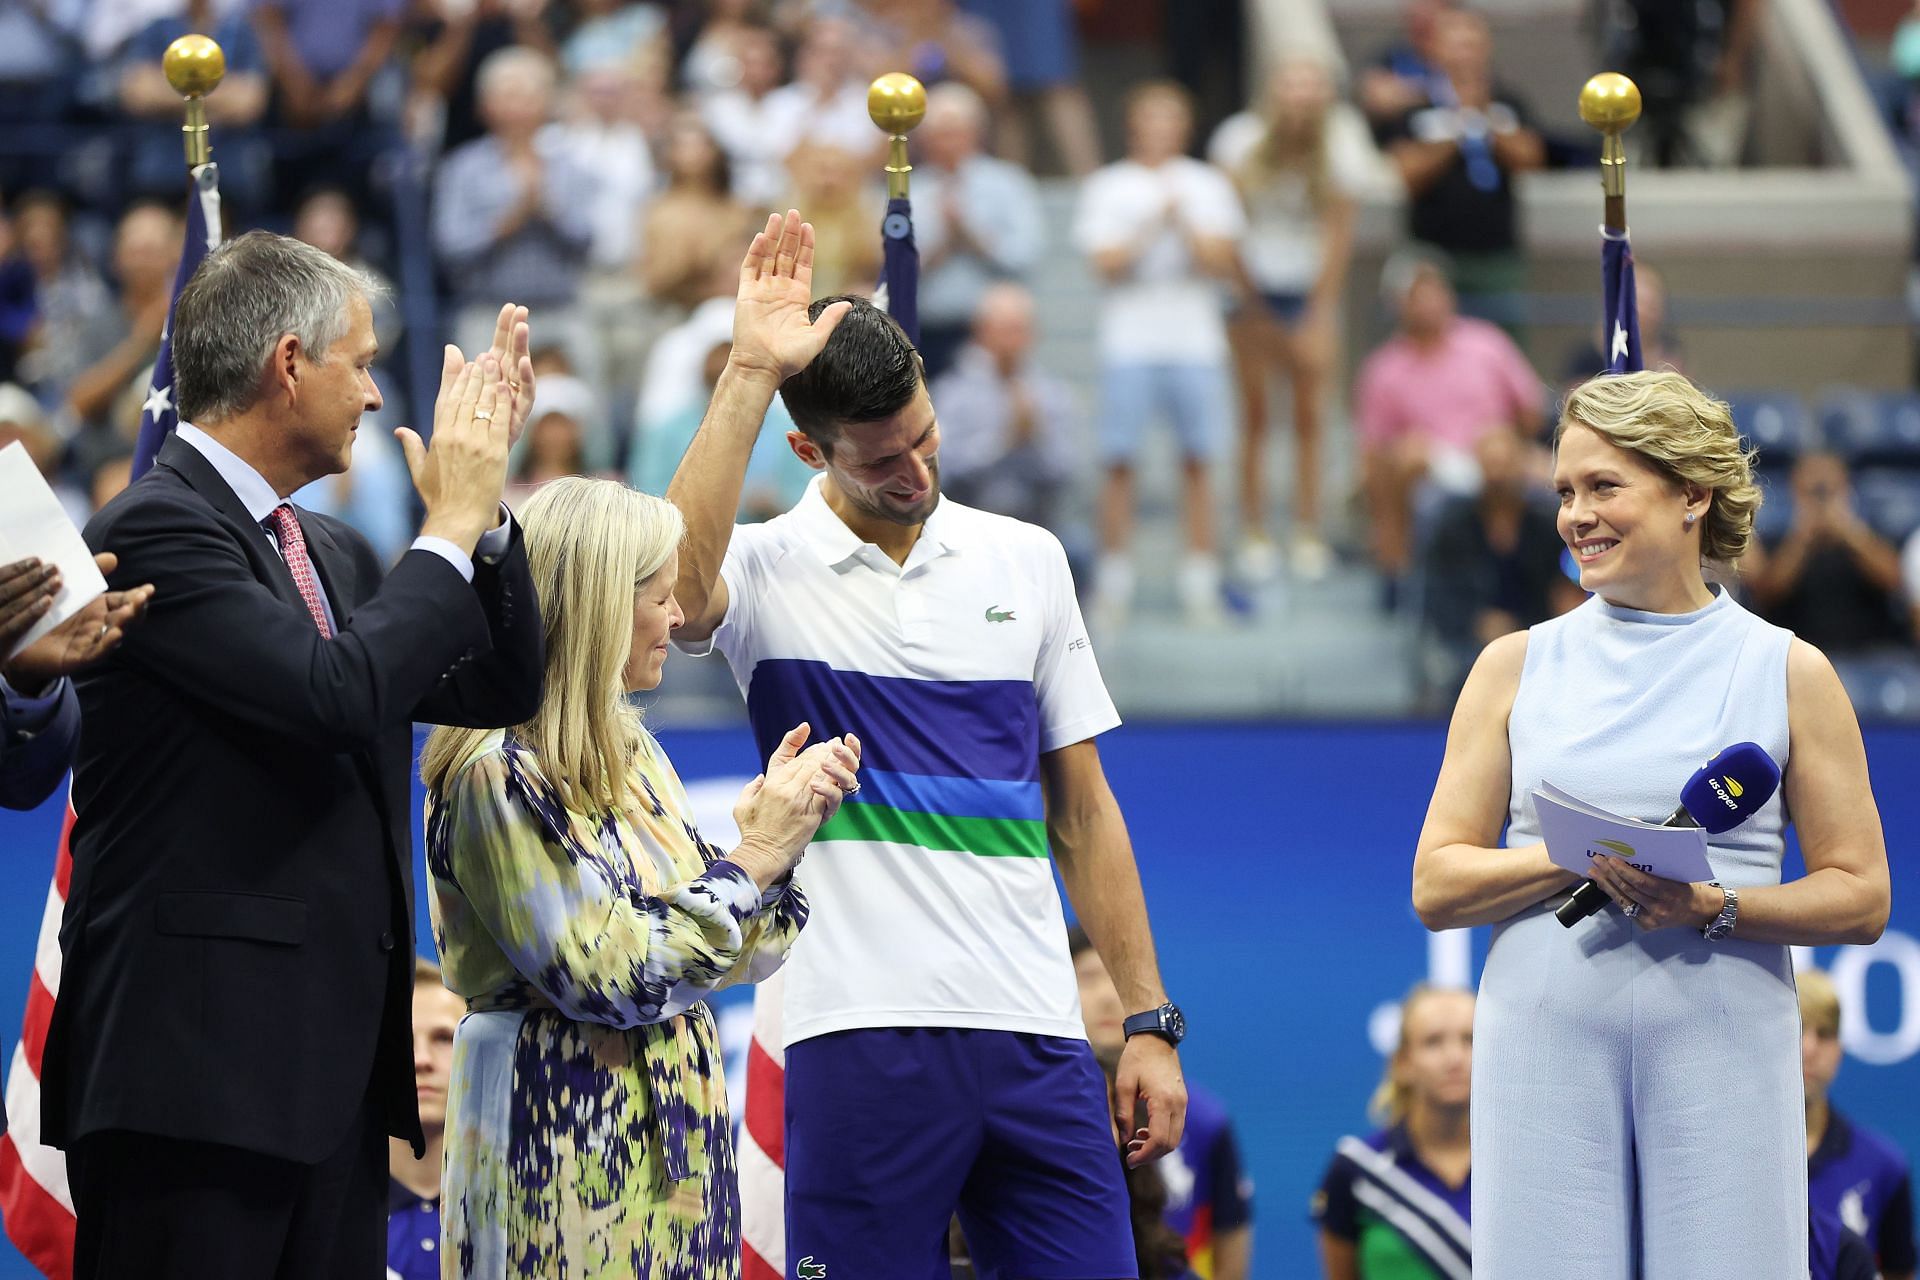 Novak Djokovic acknowledges the crowd after the 2021 US Open final